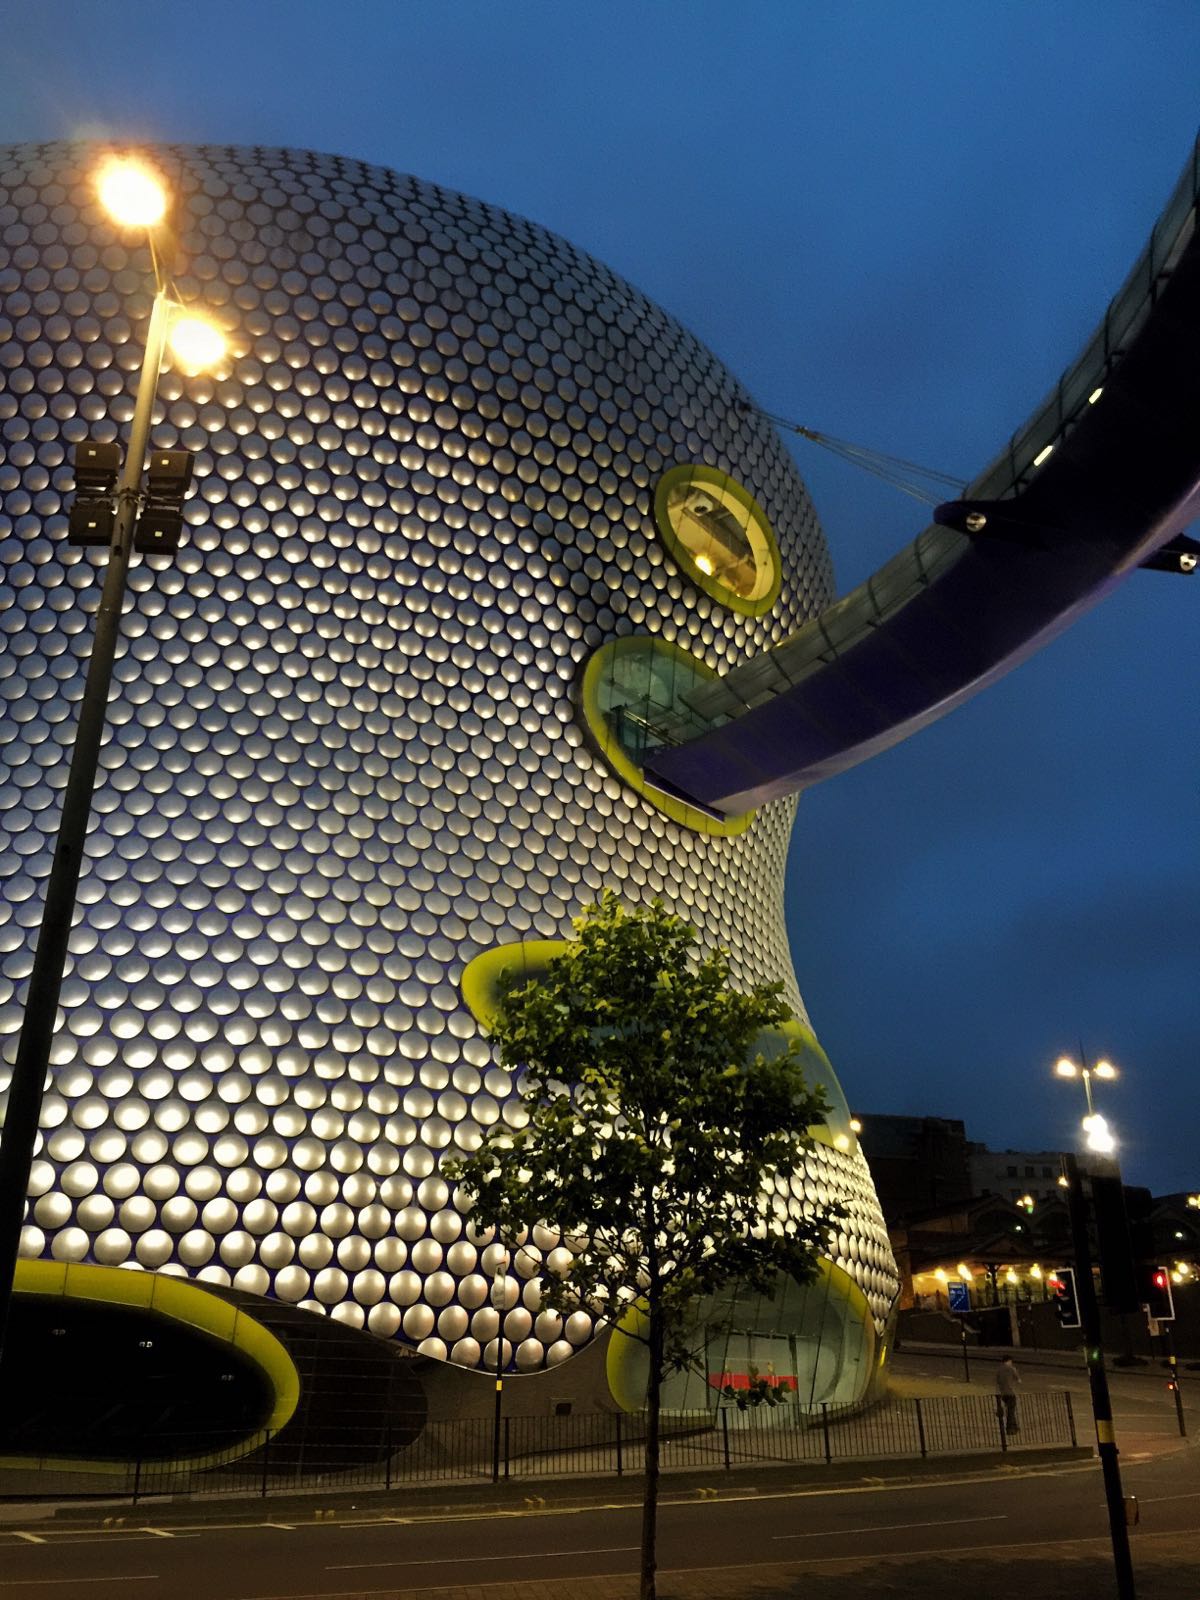 B&B Birmingham Bullring Shopping Centre | Bed and Breakfasts Guide